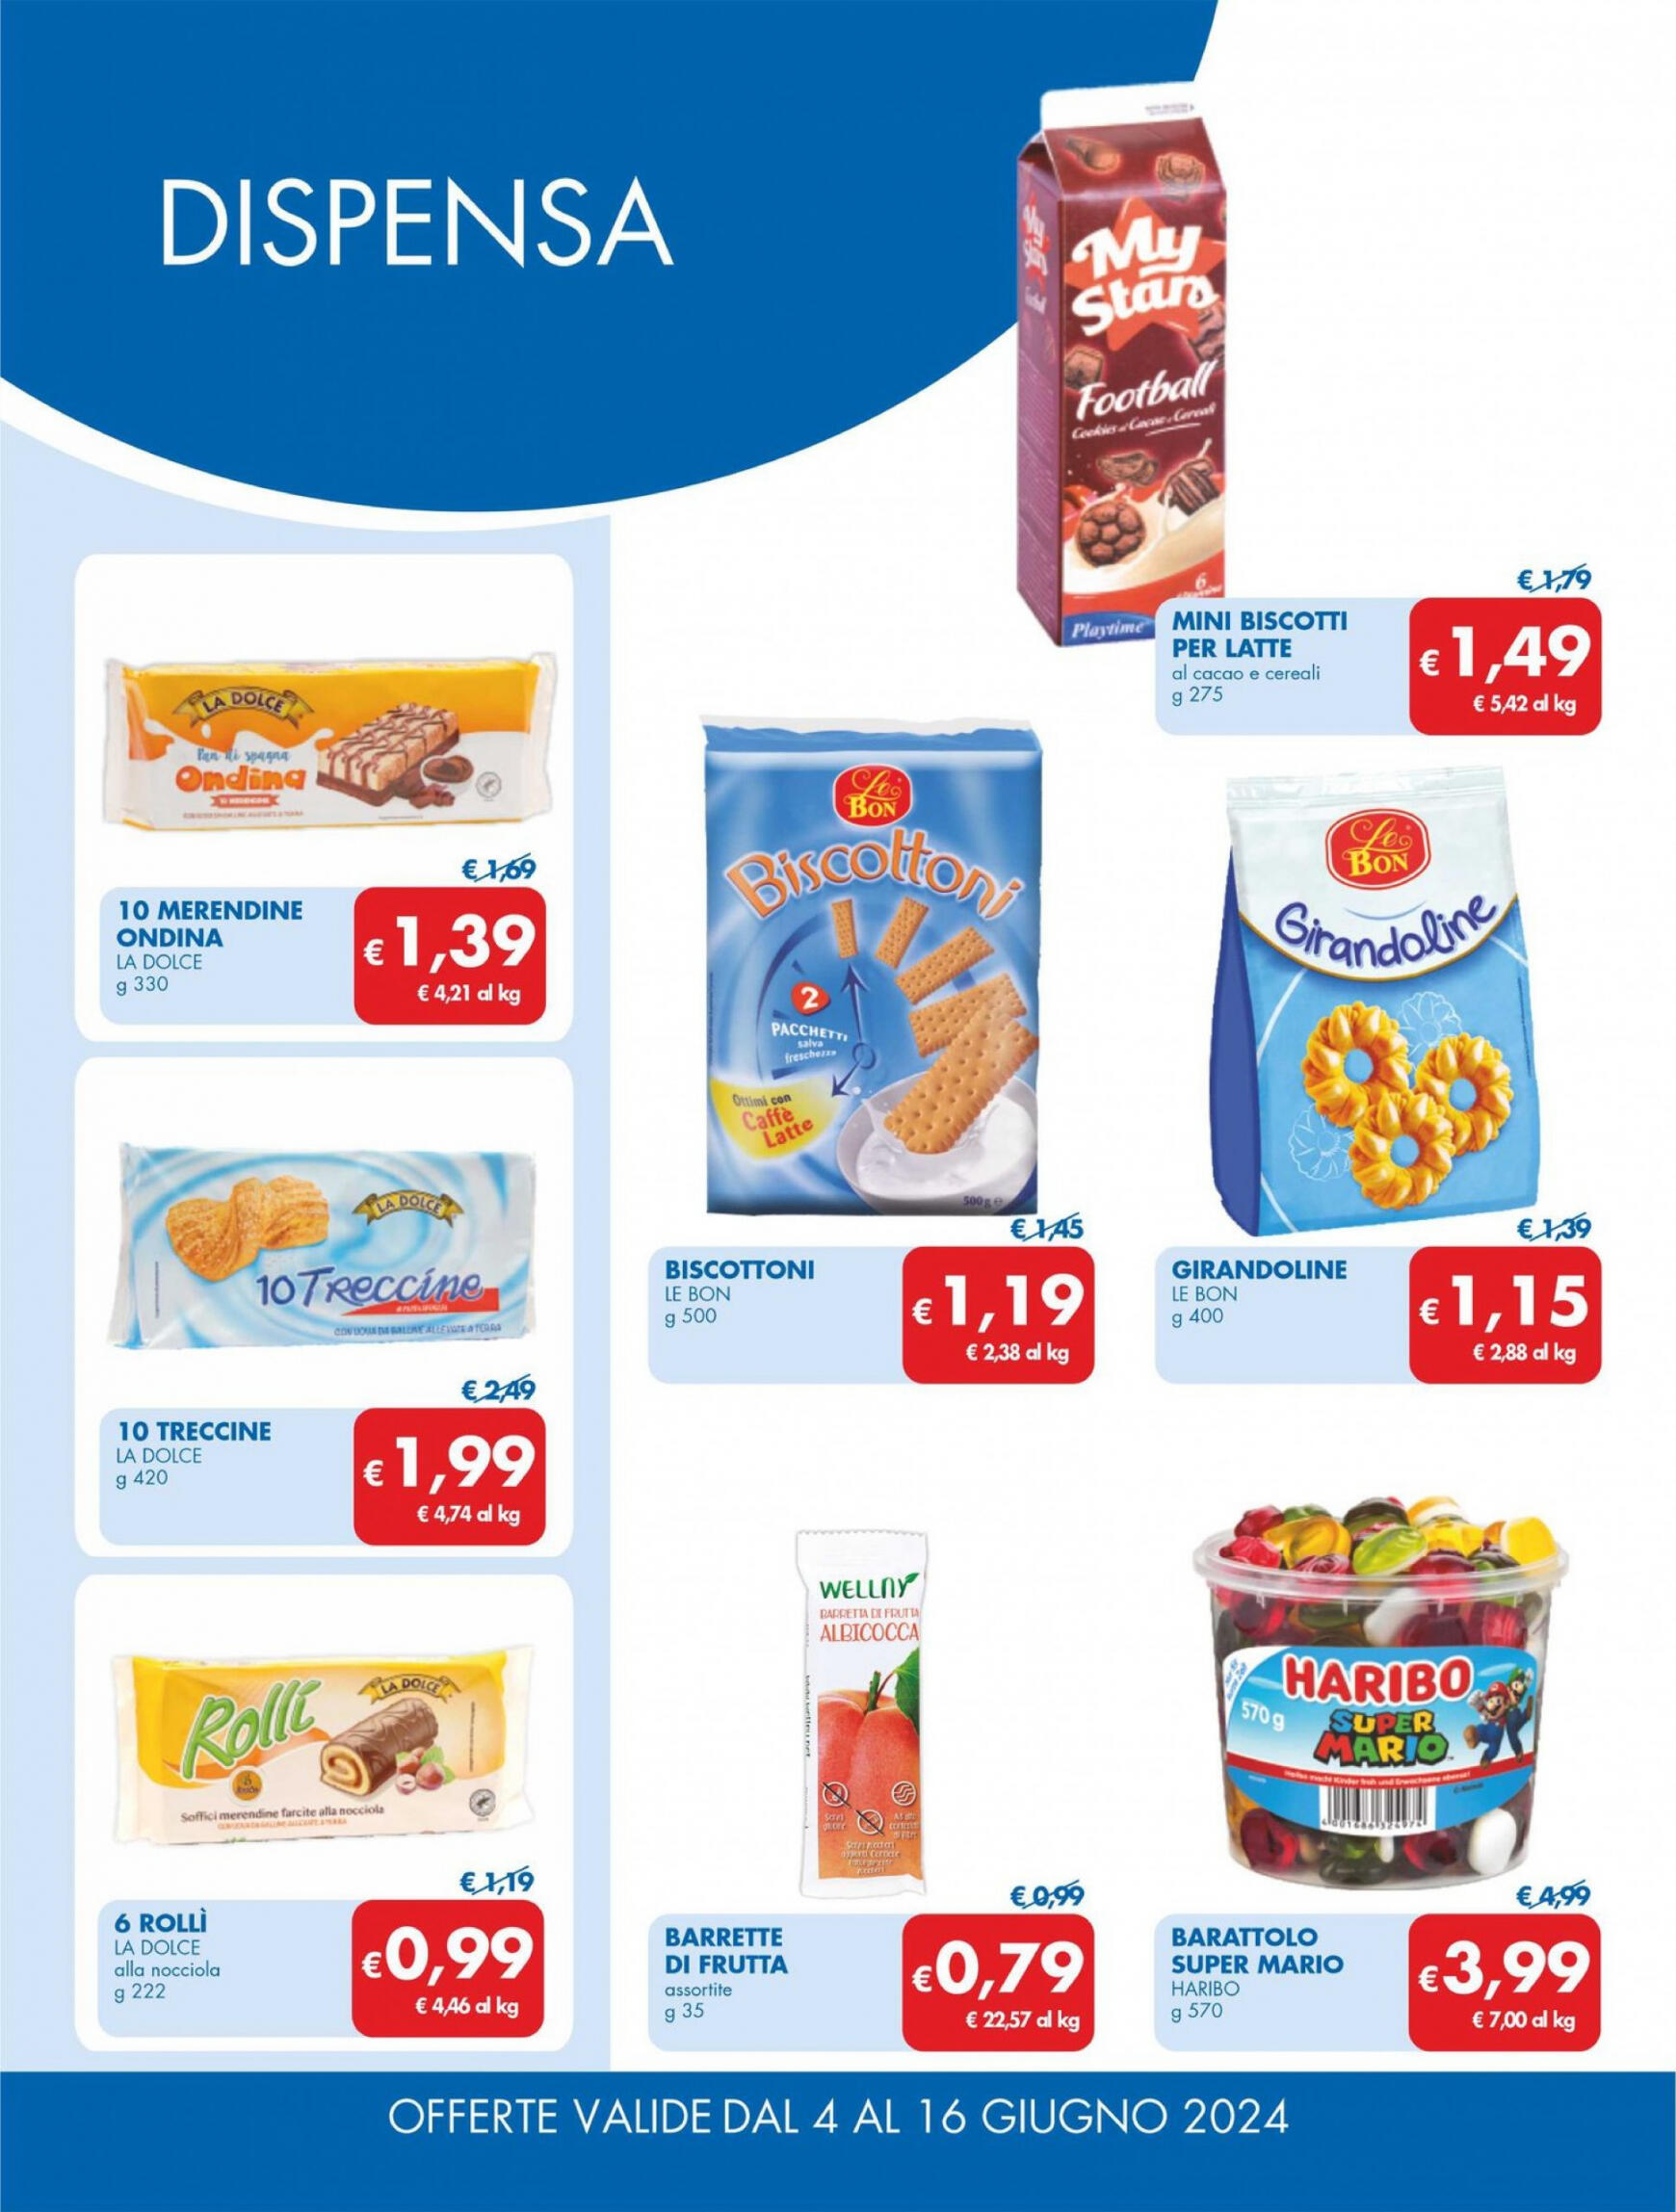 md-discount - Nuovo volantino MD 04.06. - 16.06. - page: 19